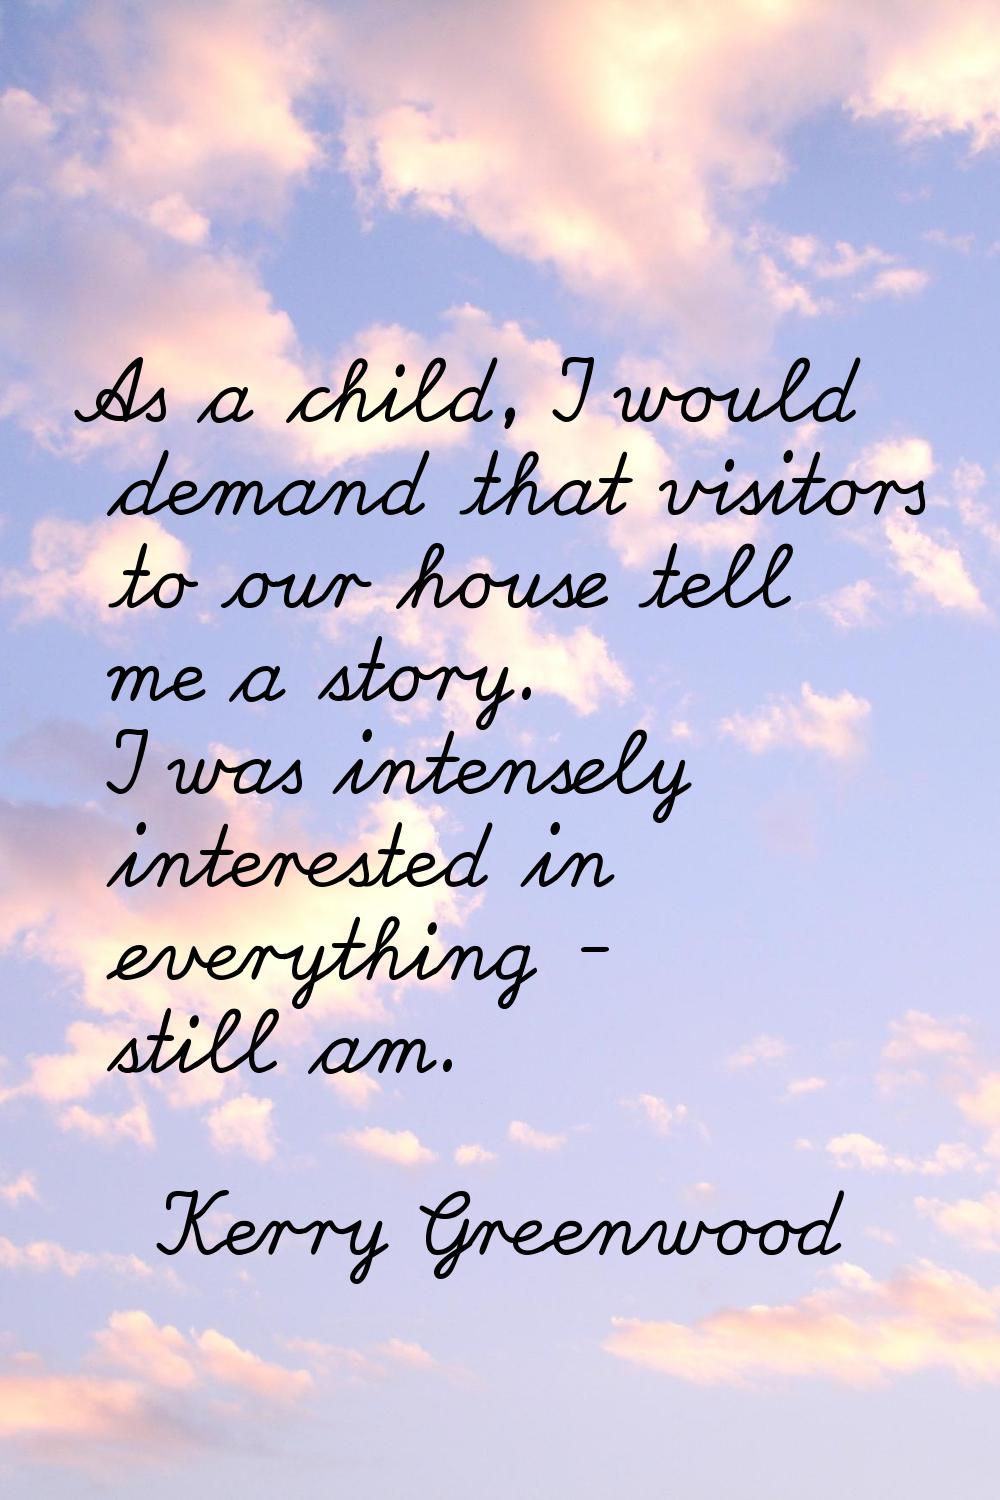 As a child, I would demand that visitors to our house tell me a story. I was intensely interested i